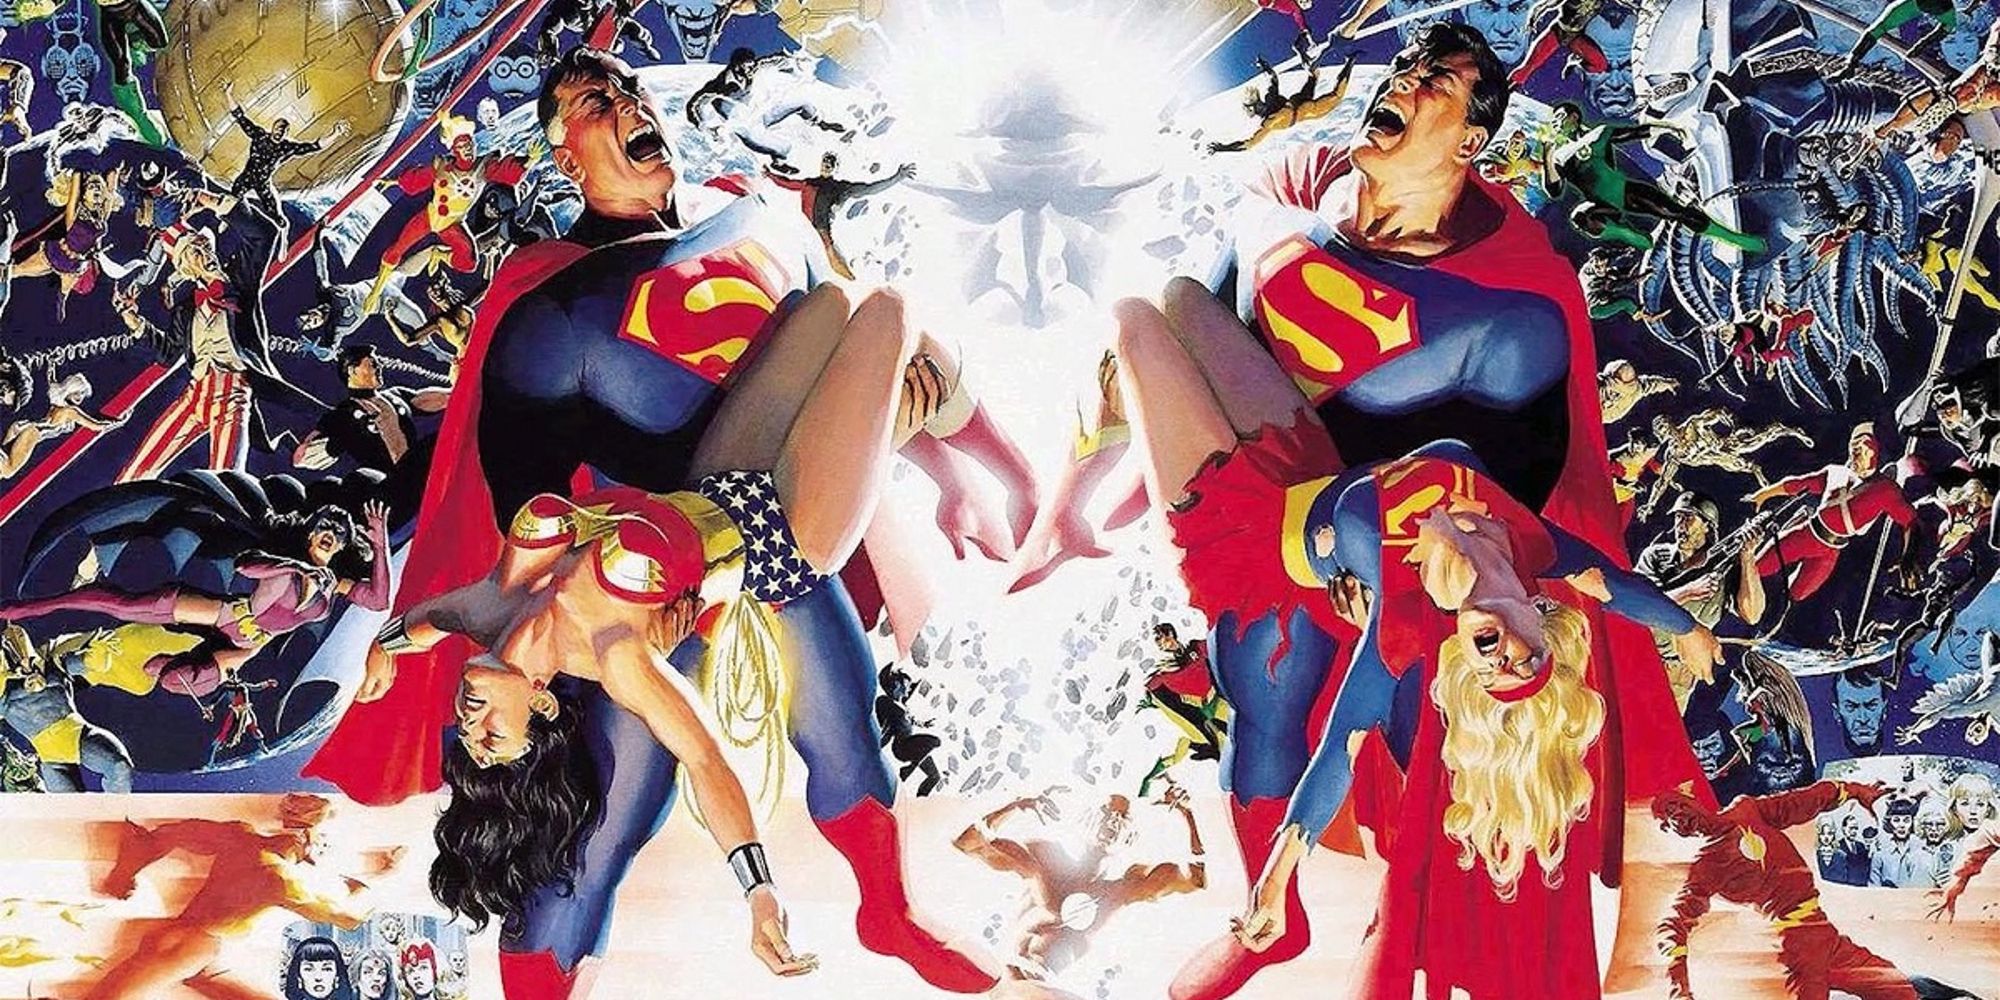 Promotional artwork for the 35th anniversary of Crisis On Infinite Earths